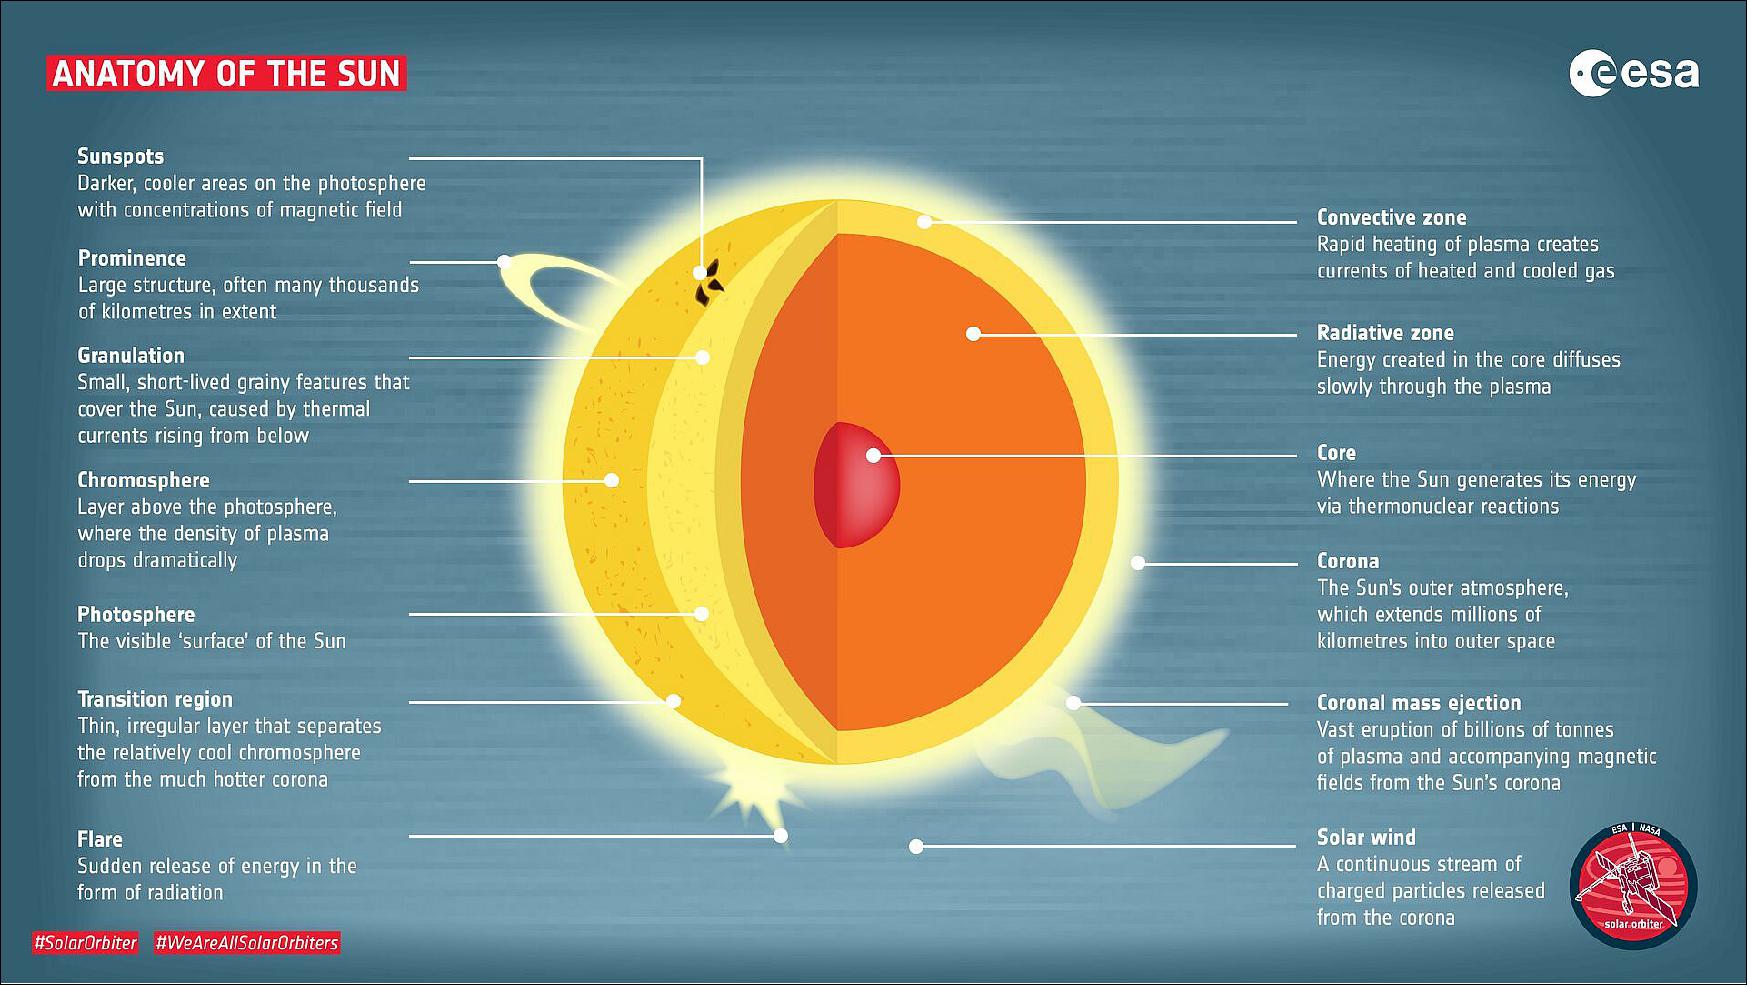 Figure 51: The anatomy of the sun is provided in Table 3 with mode details (image credit: ESA, S. Poletti)